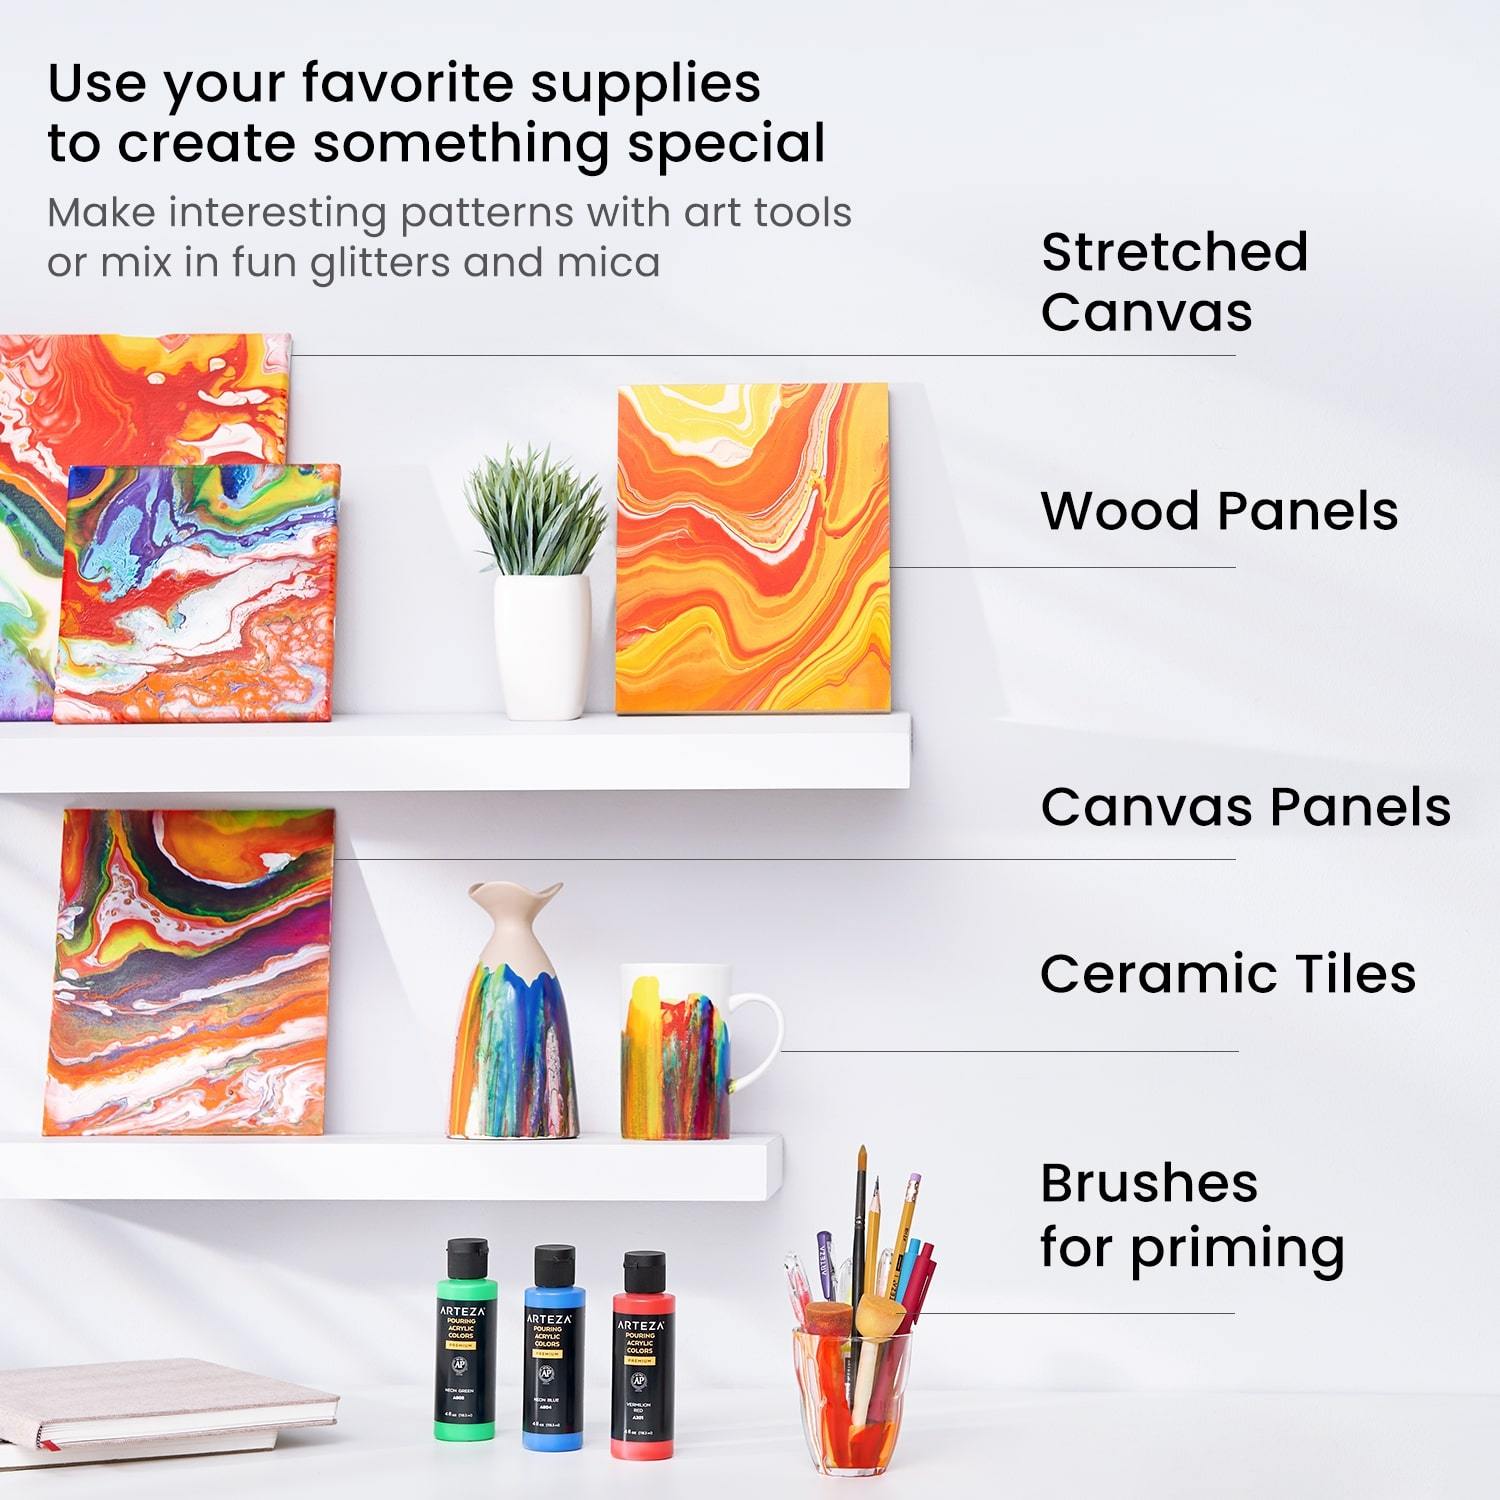 Pouring Acrylic Paint Supplies  Acrylic Pouring Paint Sets